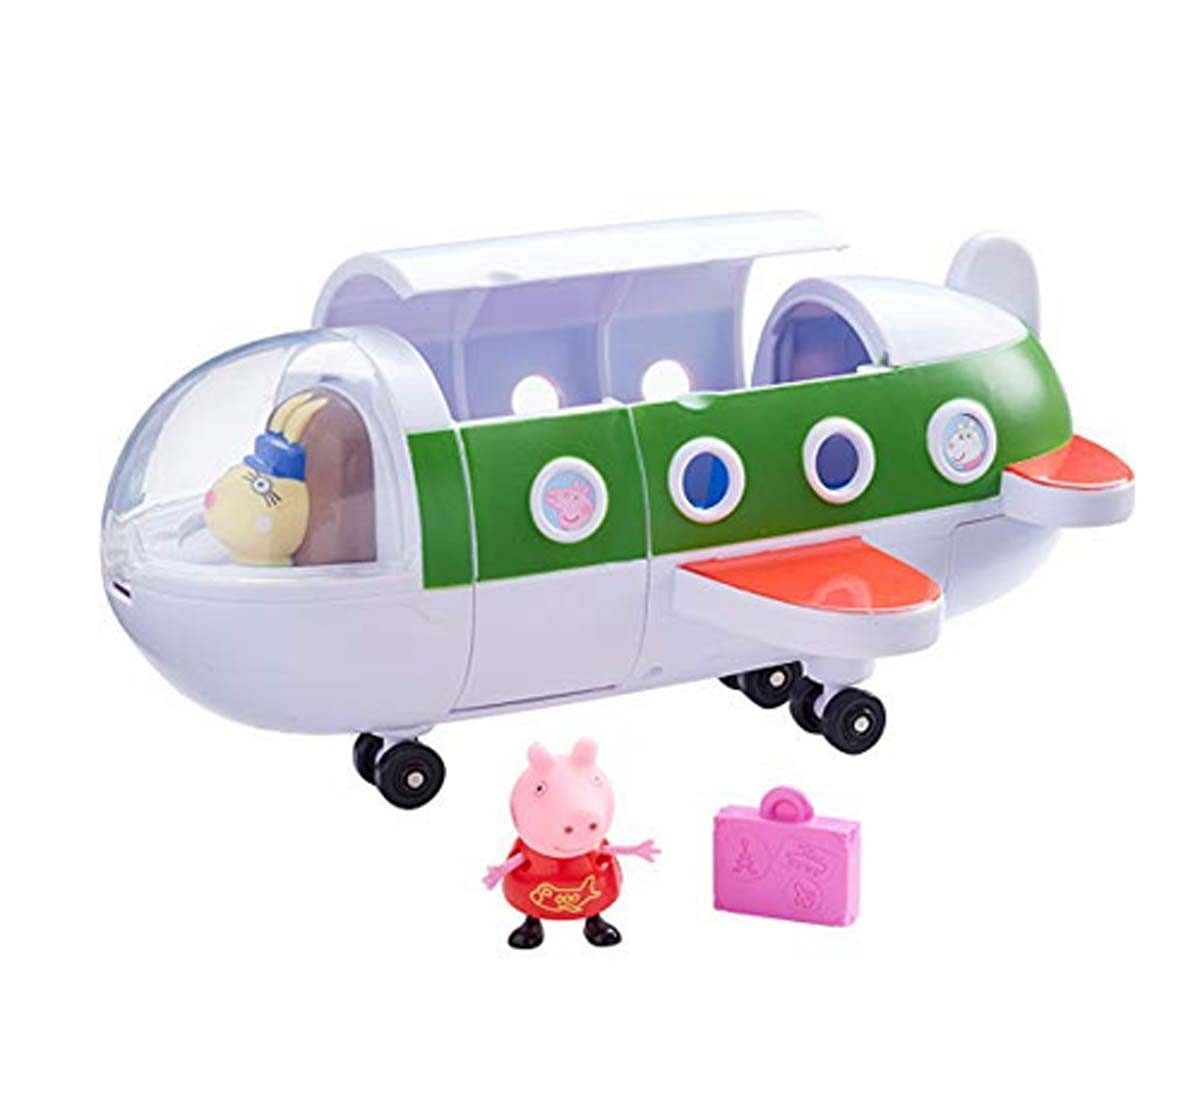 Peppa Pig Air Jet Figure Roleplay sets for age 3Y+ 